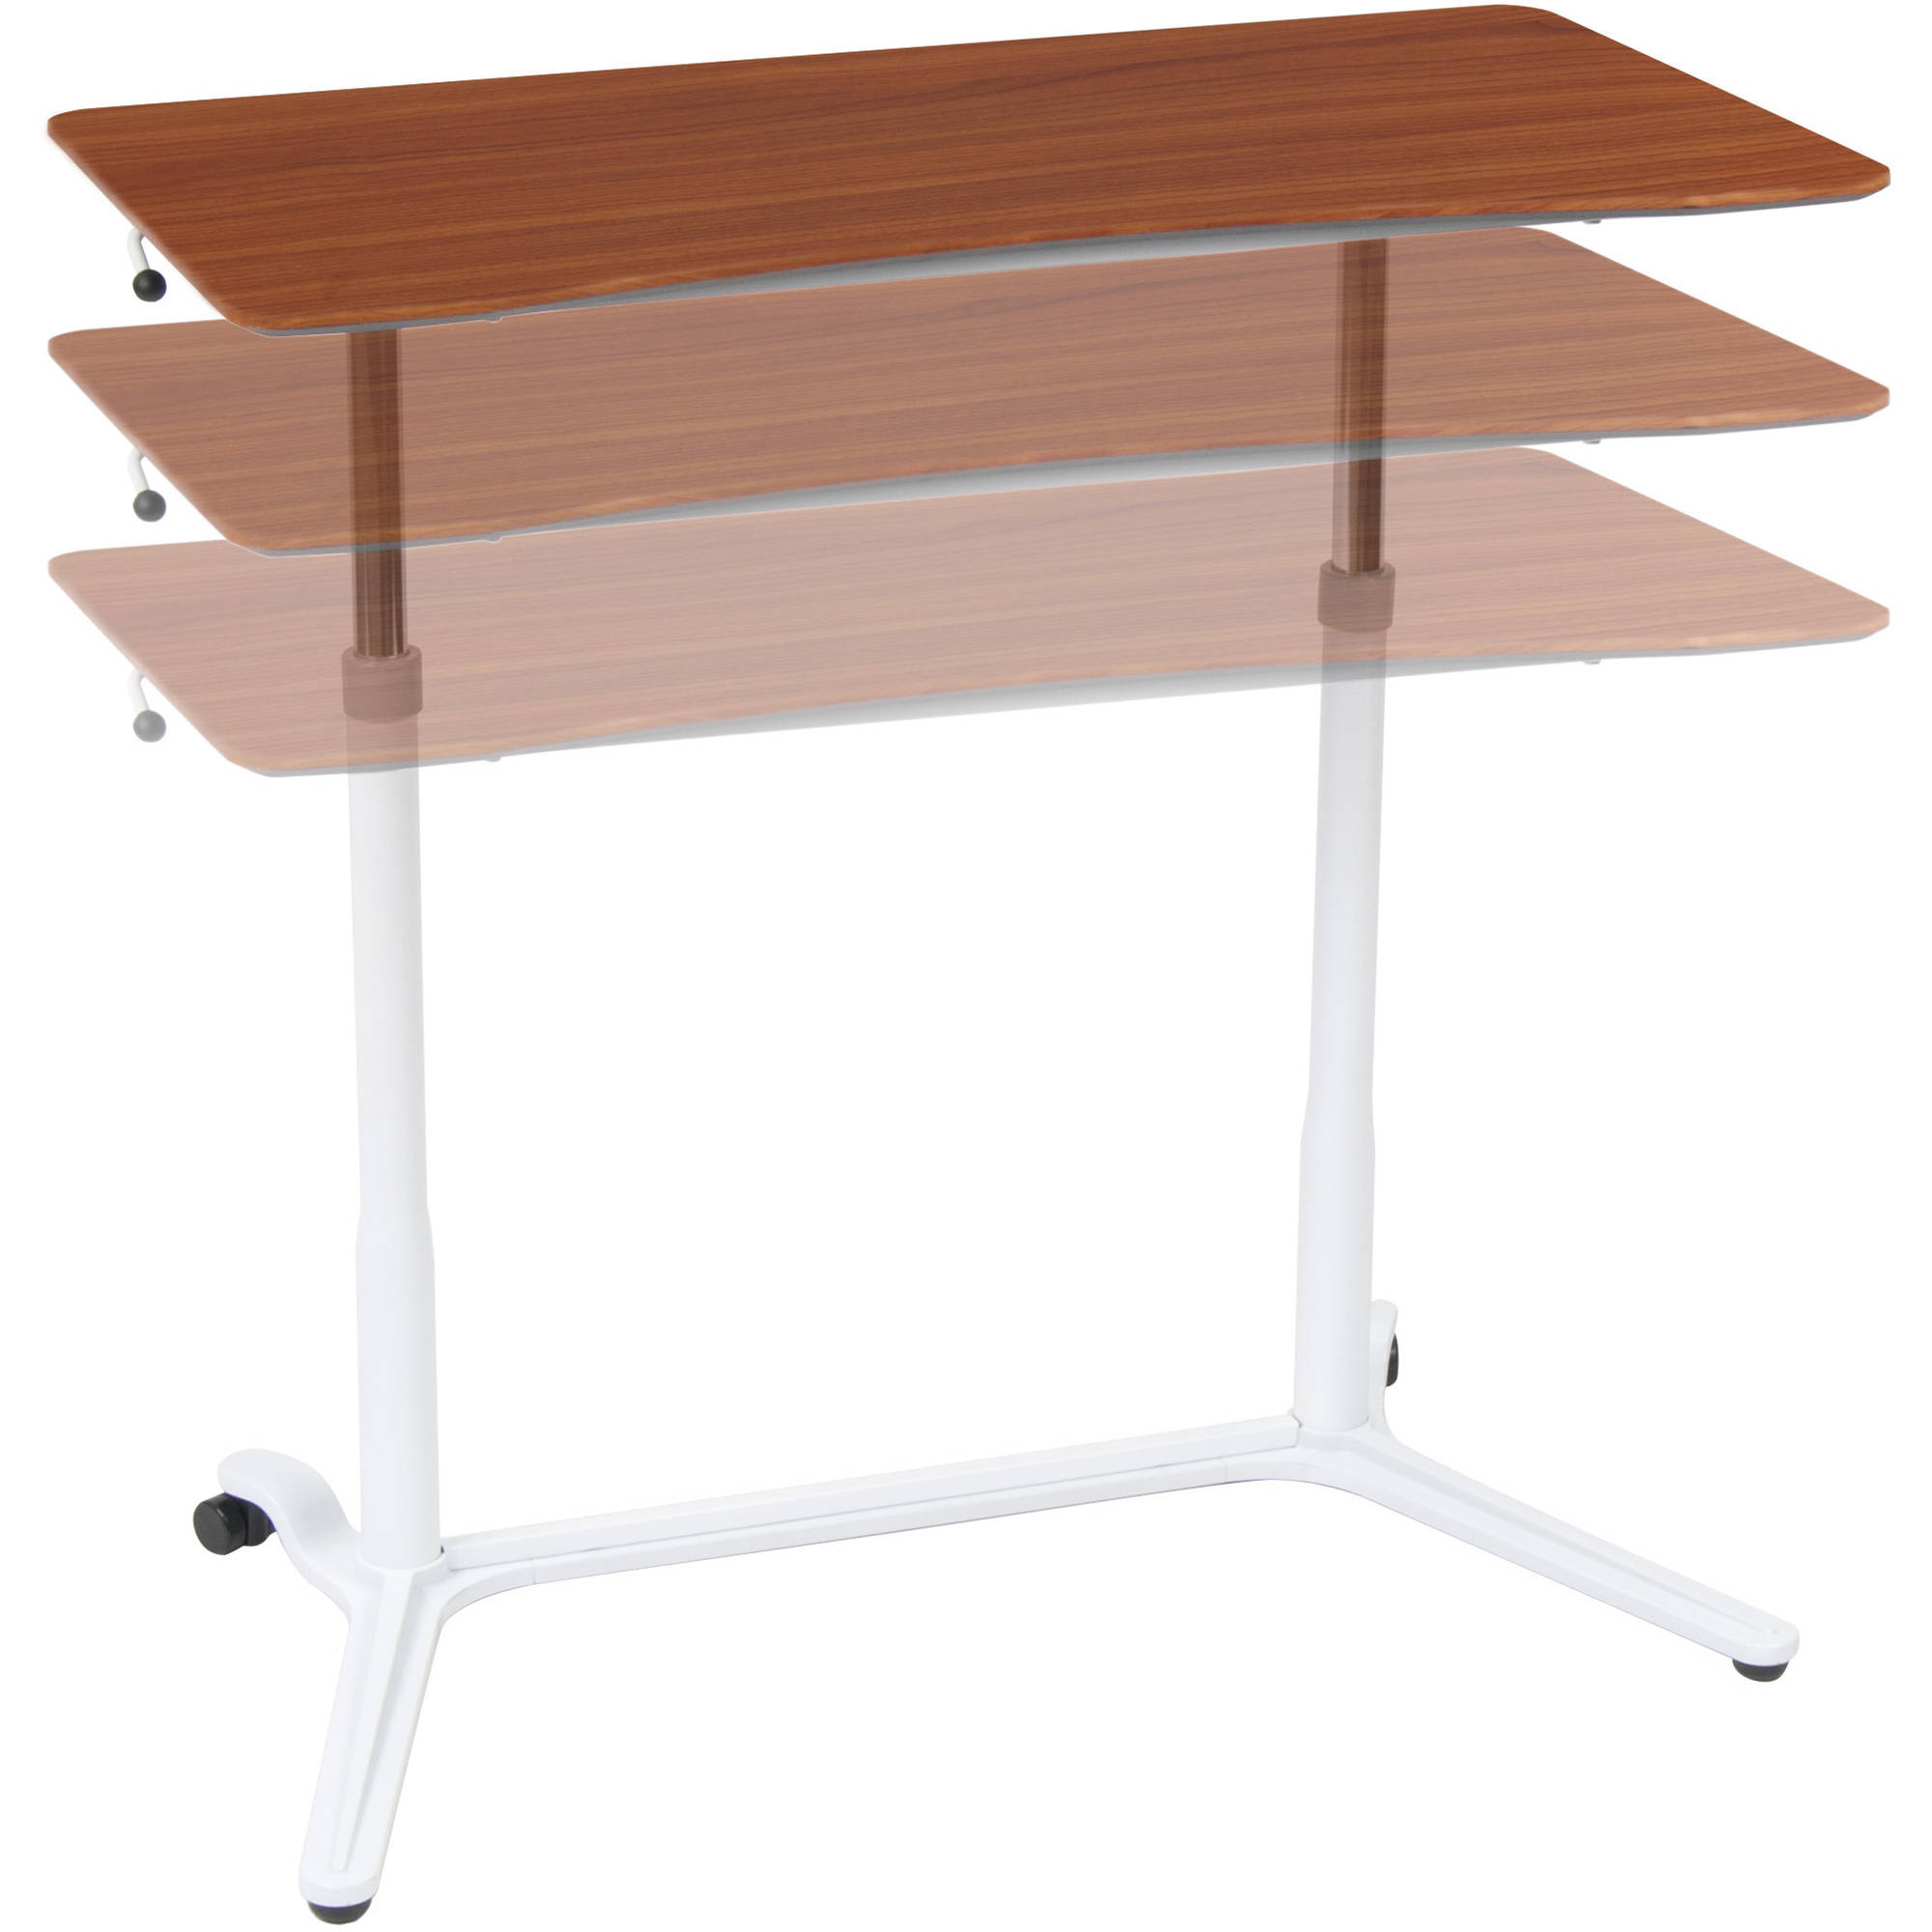 Calico Designs Sierra Adjustable Height Sit-to Stand Desk in White / Cherry # 51231 - image 2 of 4